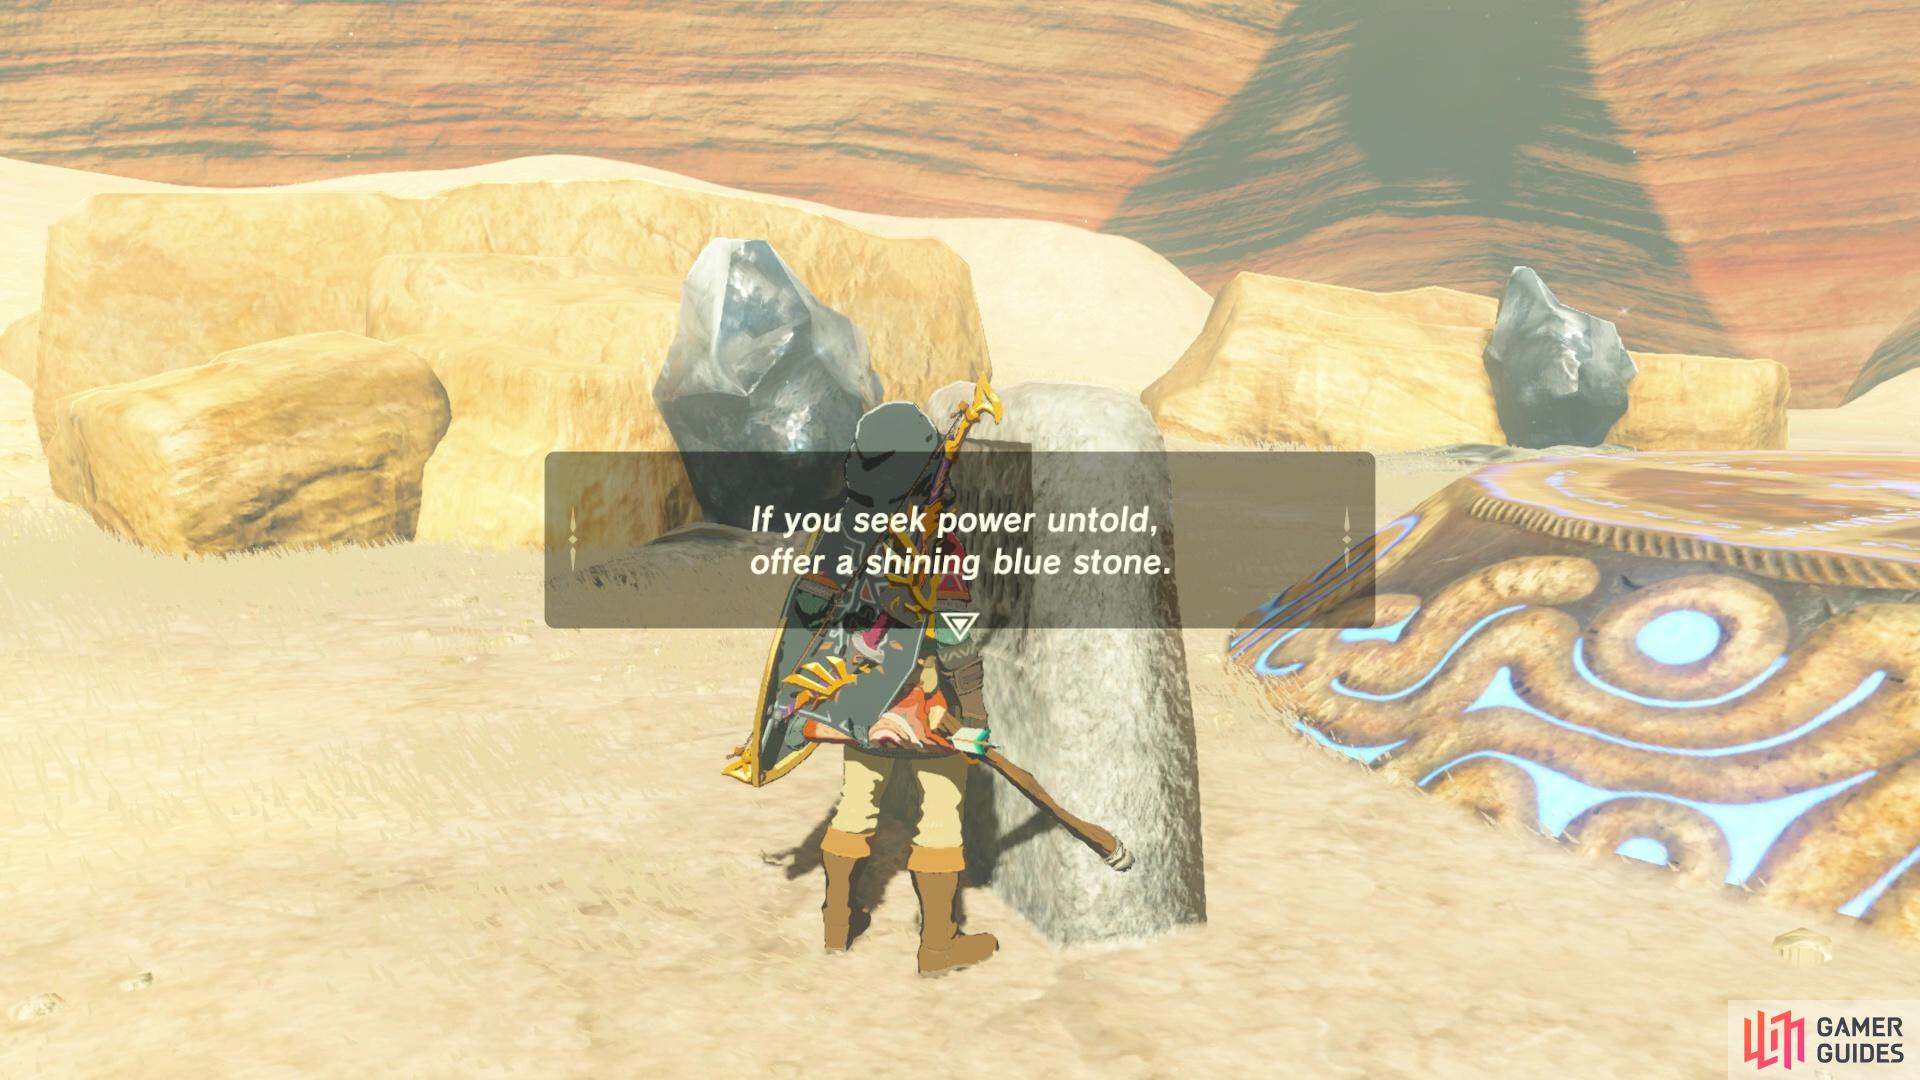 The stone slab has a riddle you'll need to solve to reveal the shrine.